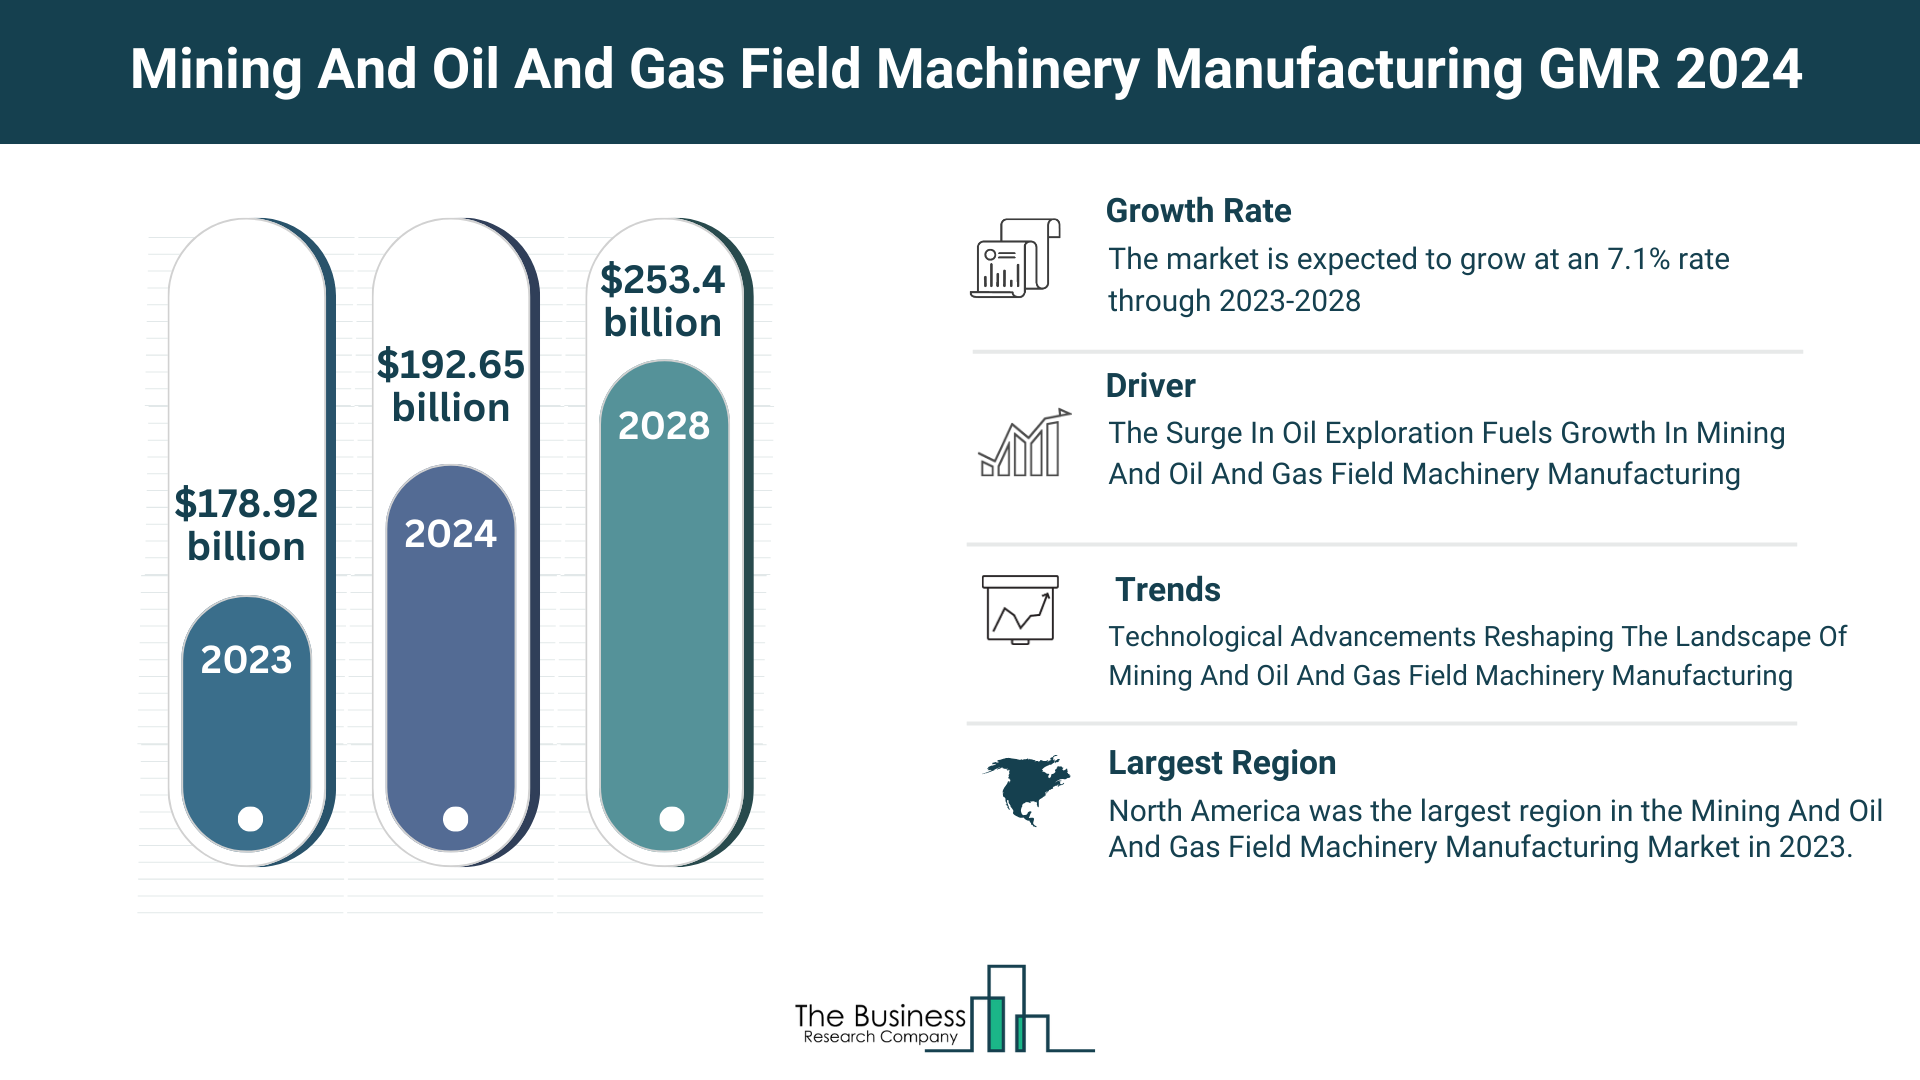 Understand How The Mining And Oil And Gas Field Machinery Manufacturing Market Is Set To Grow In Through 2024-2033